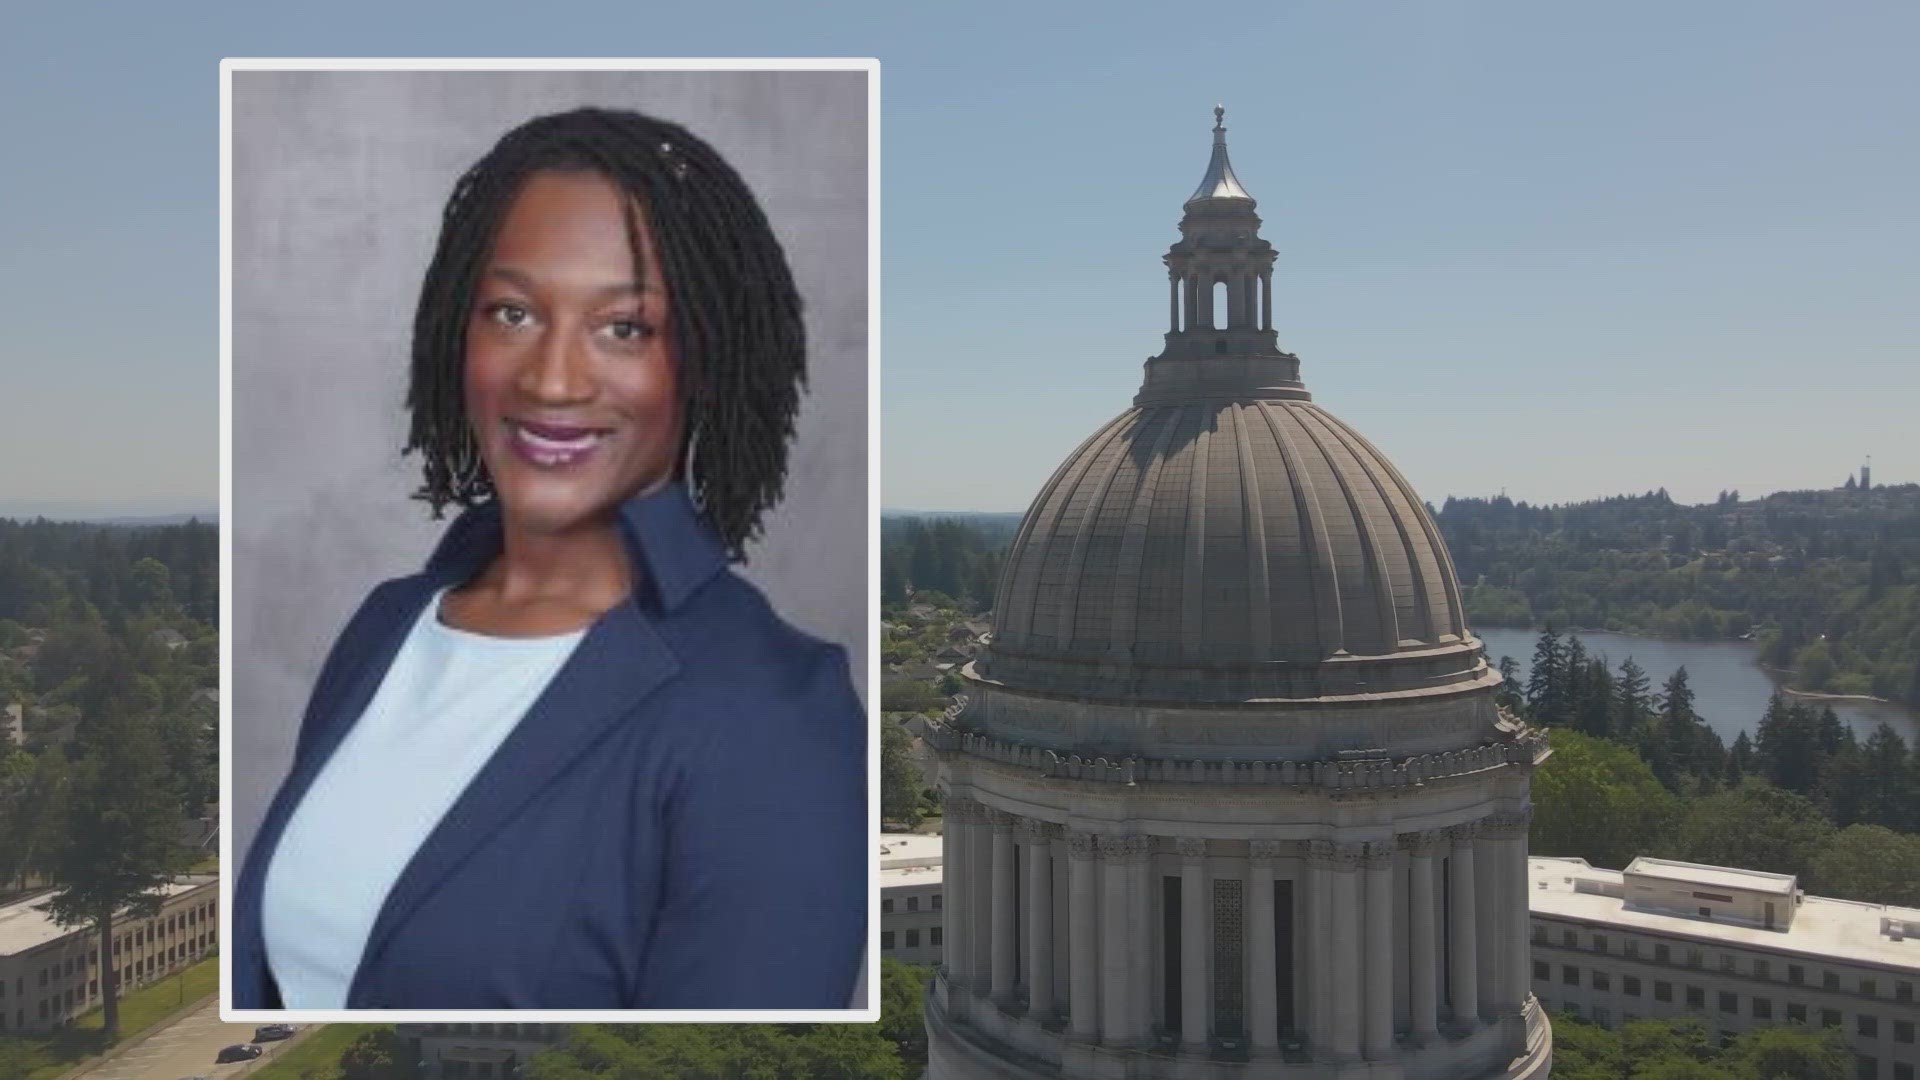 Washington Gov. Jay Inslee has officially appointed a new director for the Washington State Office of Equity.